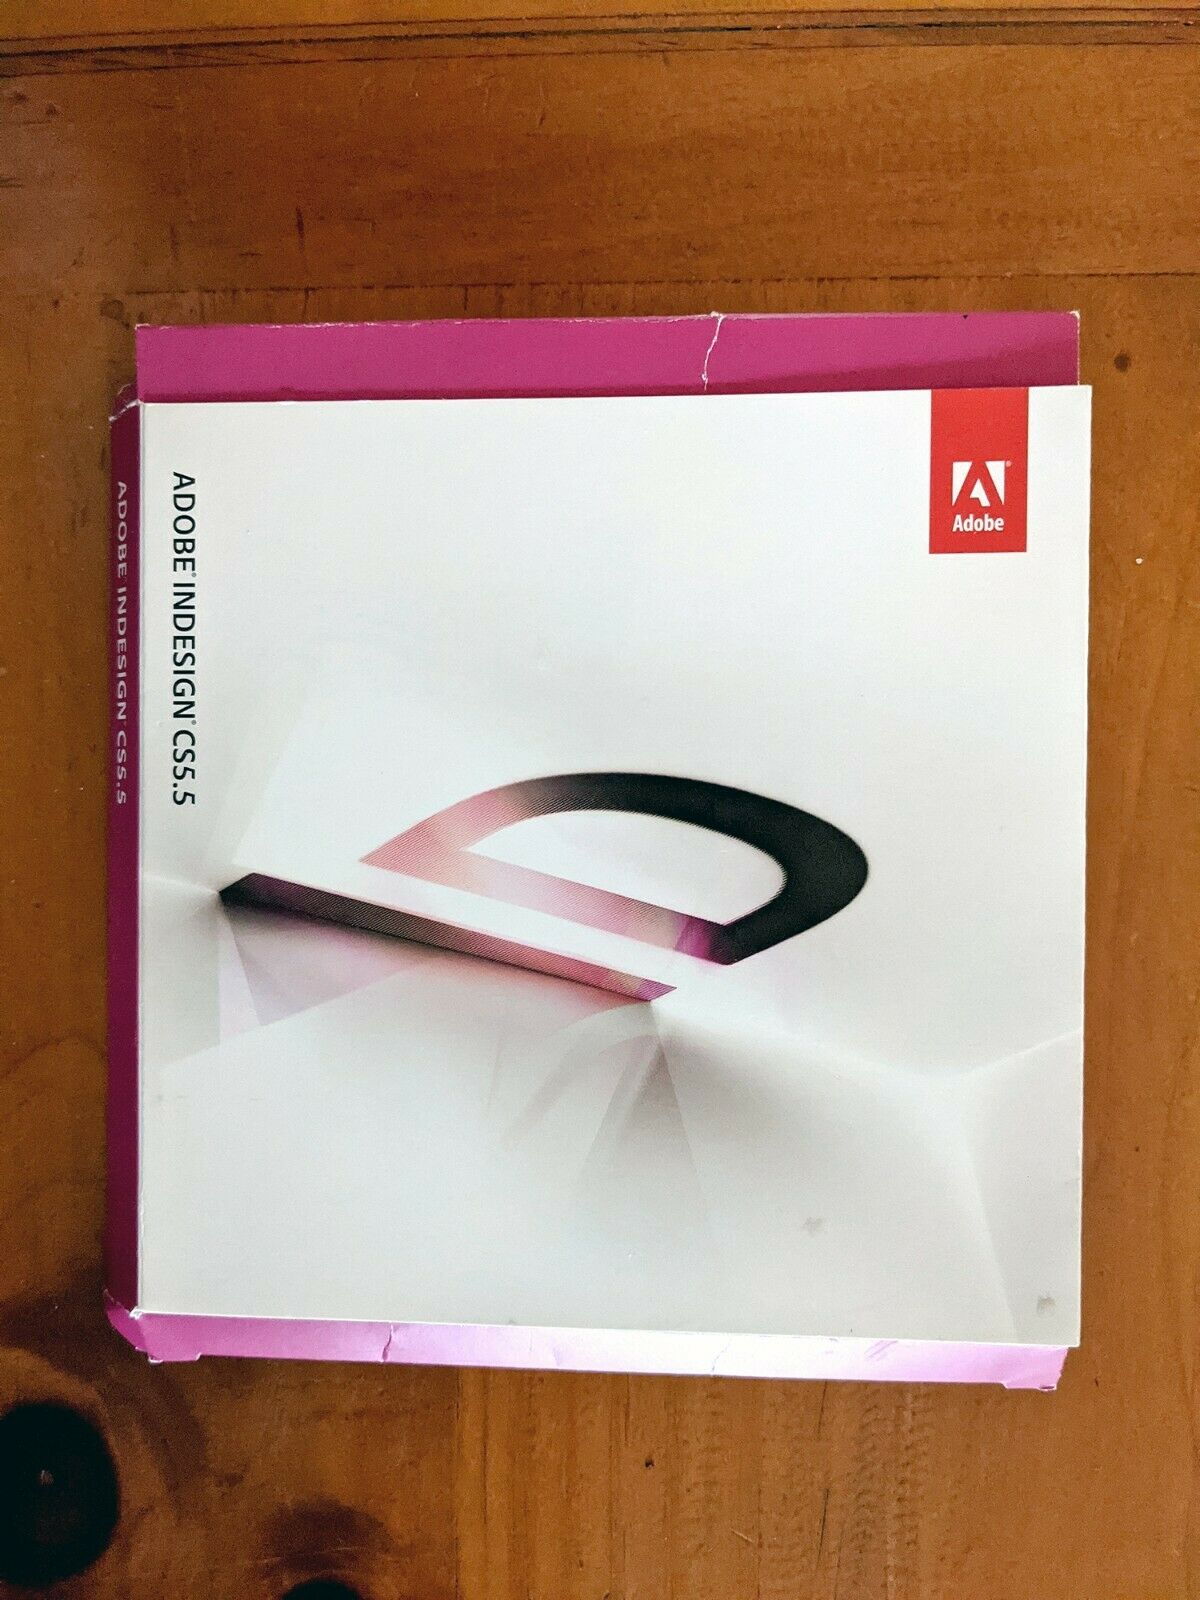 find out the serial number for adobe cs5 mac